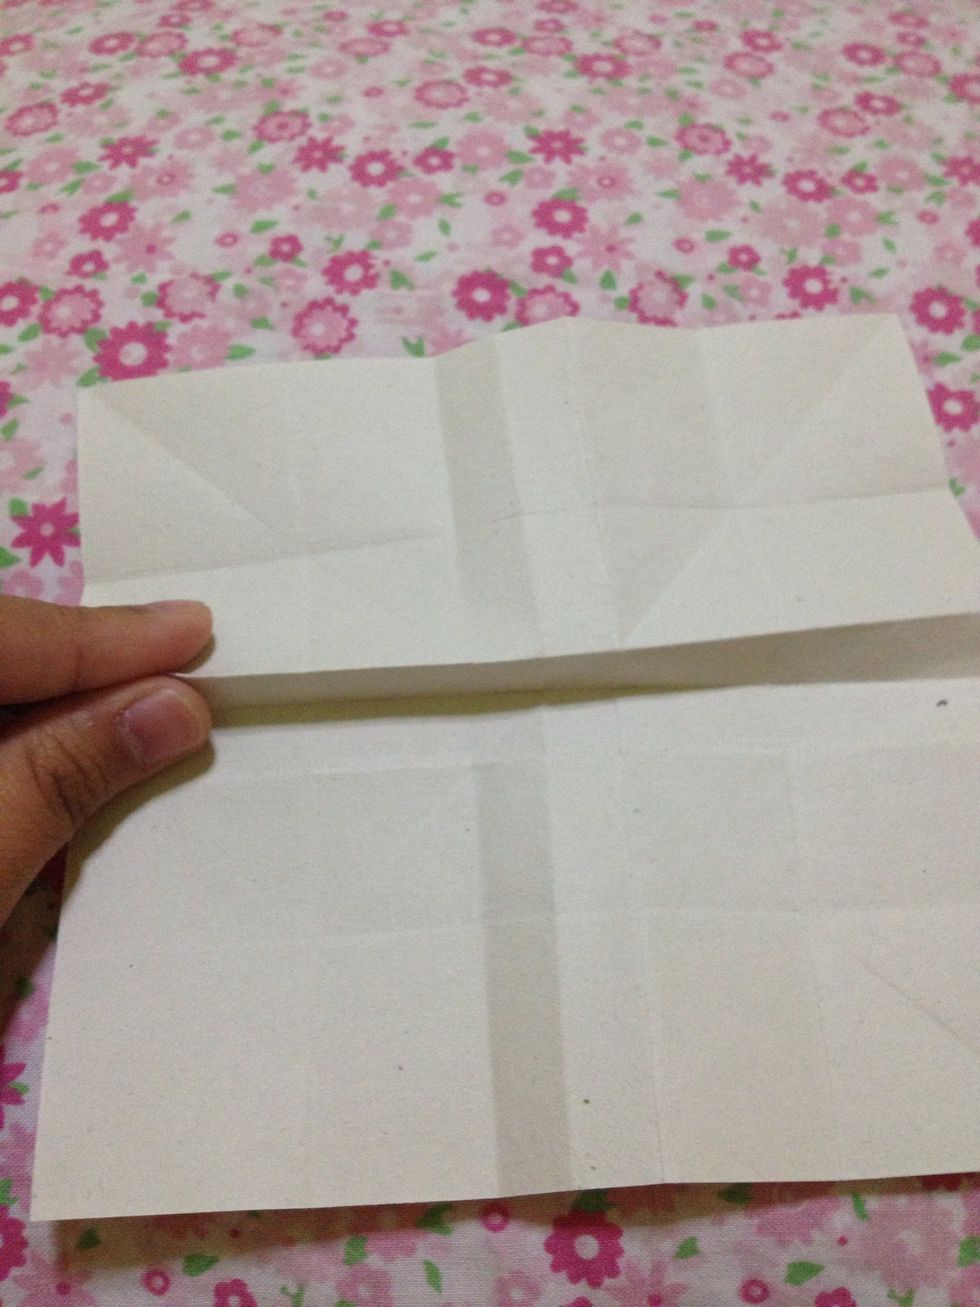 Make a mountain fold in the upper line of the center part.